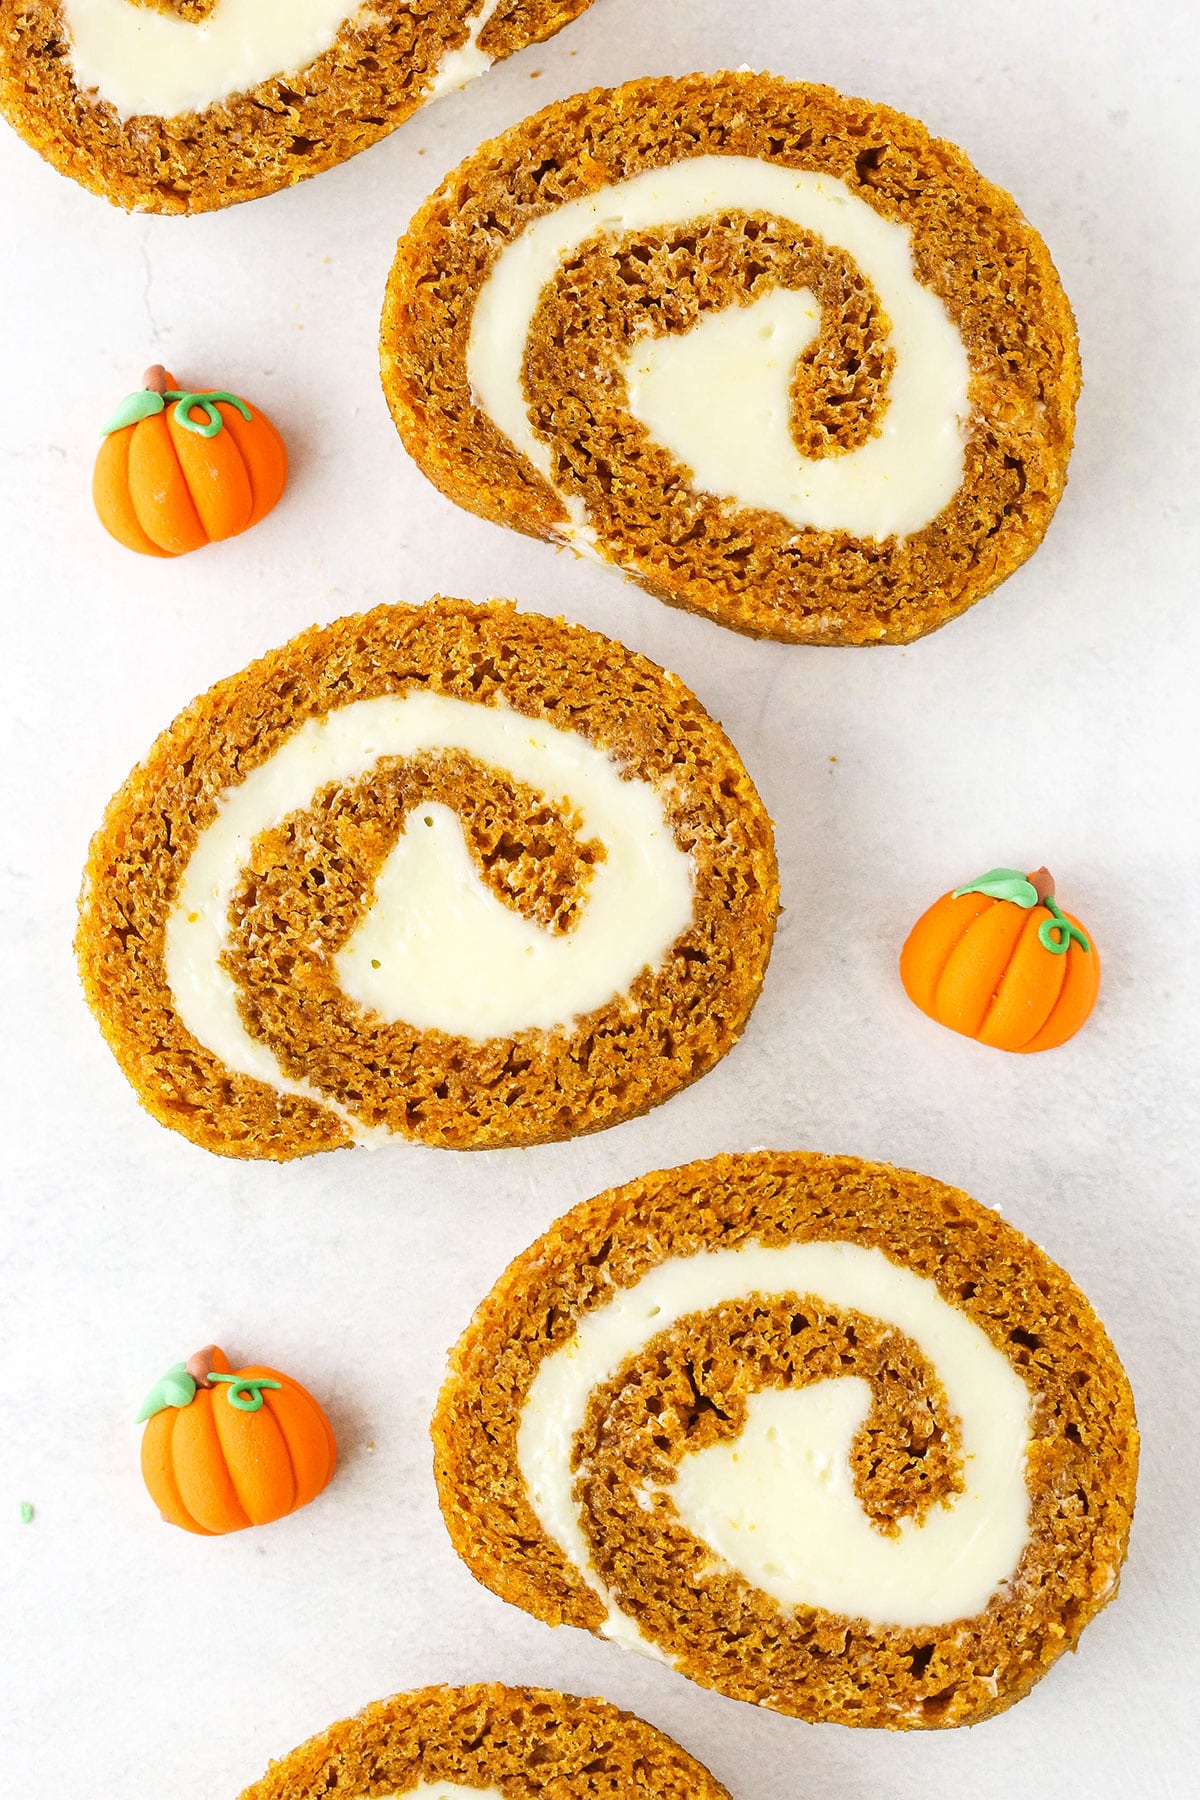 Overhead view of five slices of Pumpkin Roll Cake spread out on a white table with three pumpkin shaped candies.